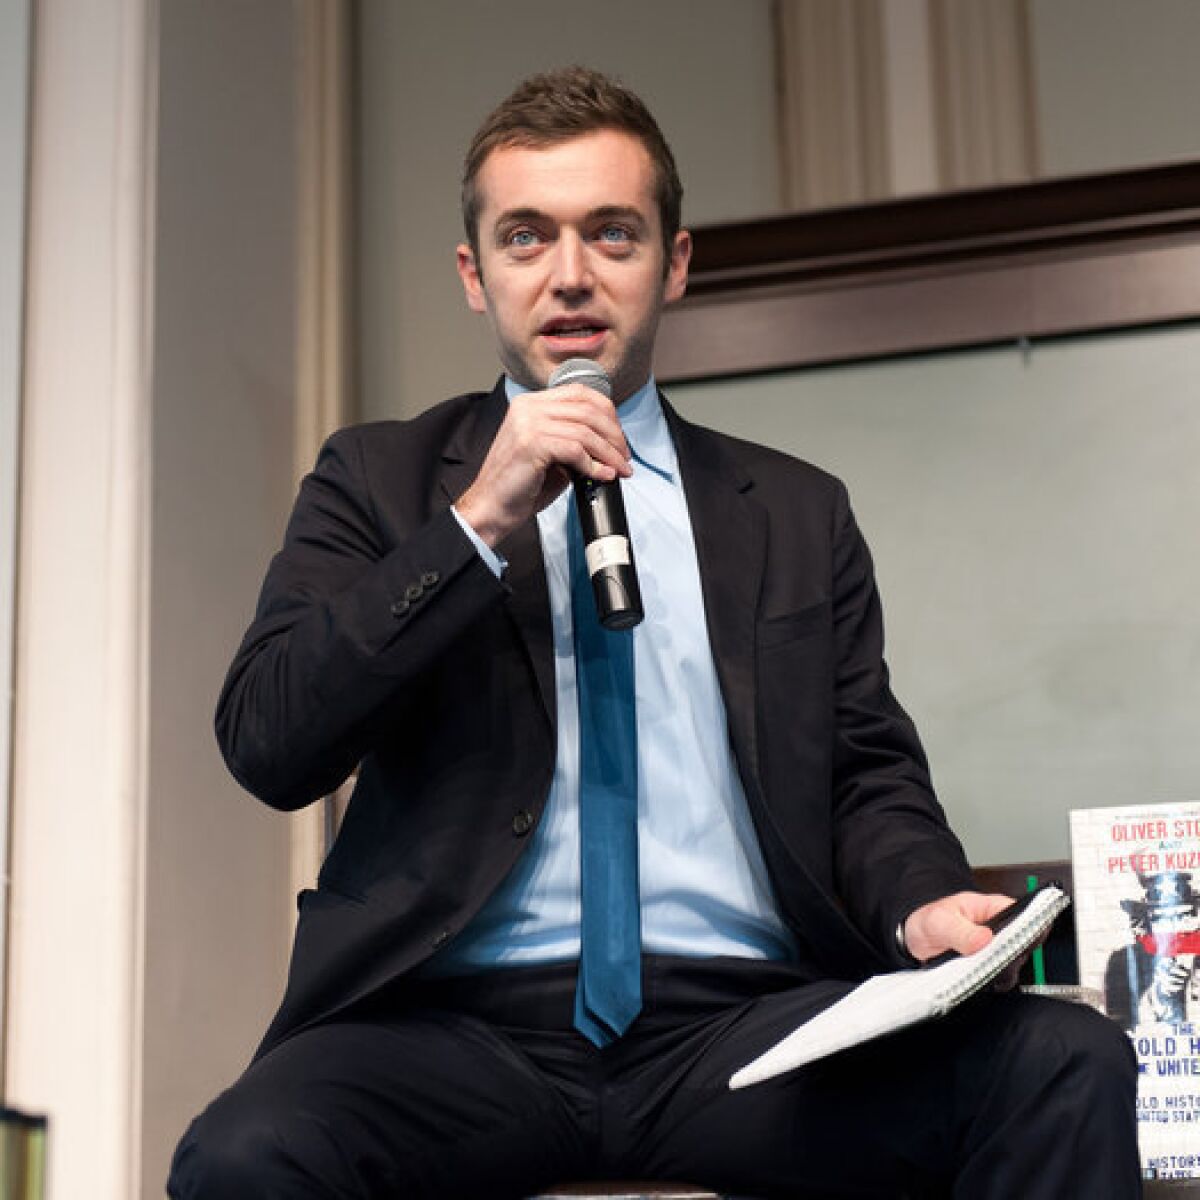 Michael Hastings, shown last year, rejected the cozy access reporting favored by some of his colleagues in favor of bare-knuckle truth-telling that sometimes rubbed his peers and subjects the wrong way.